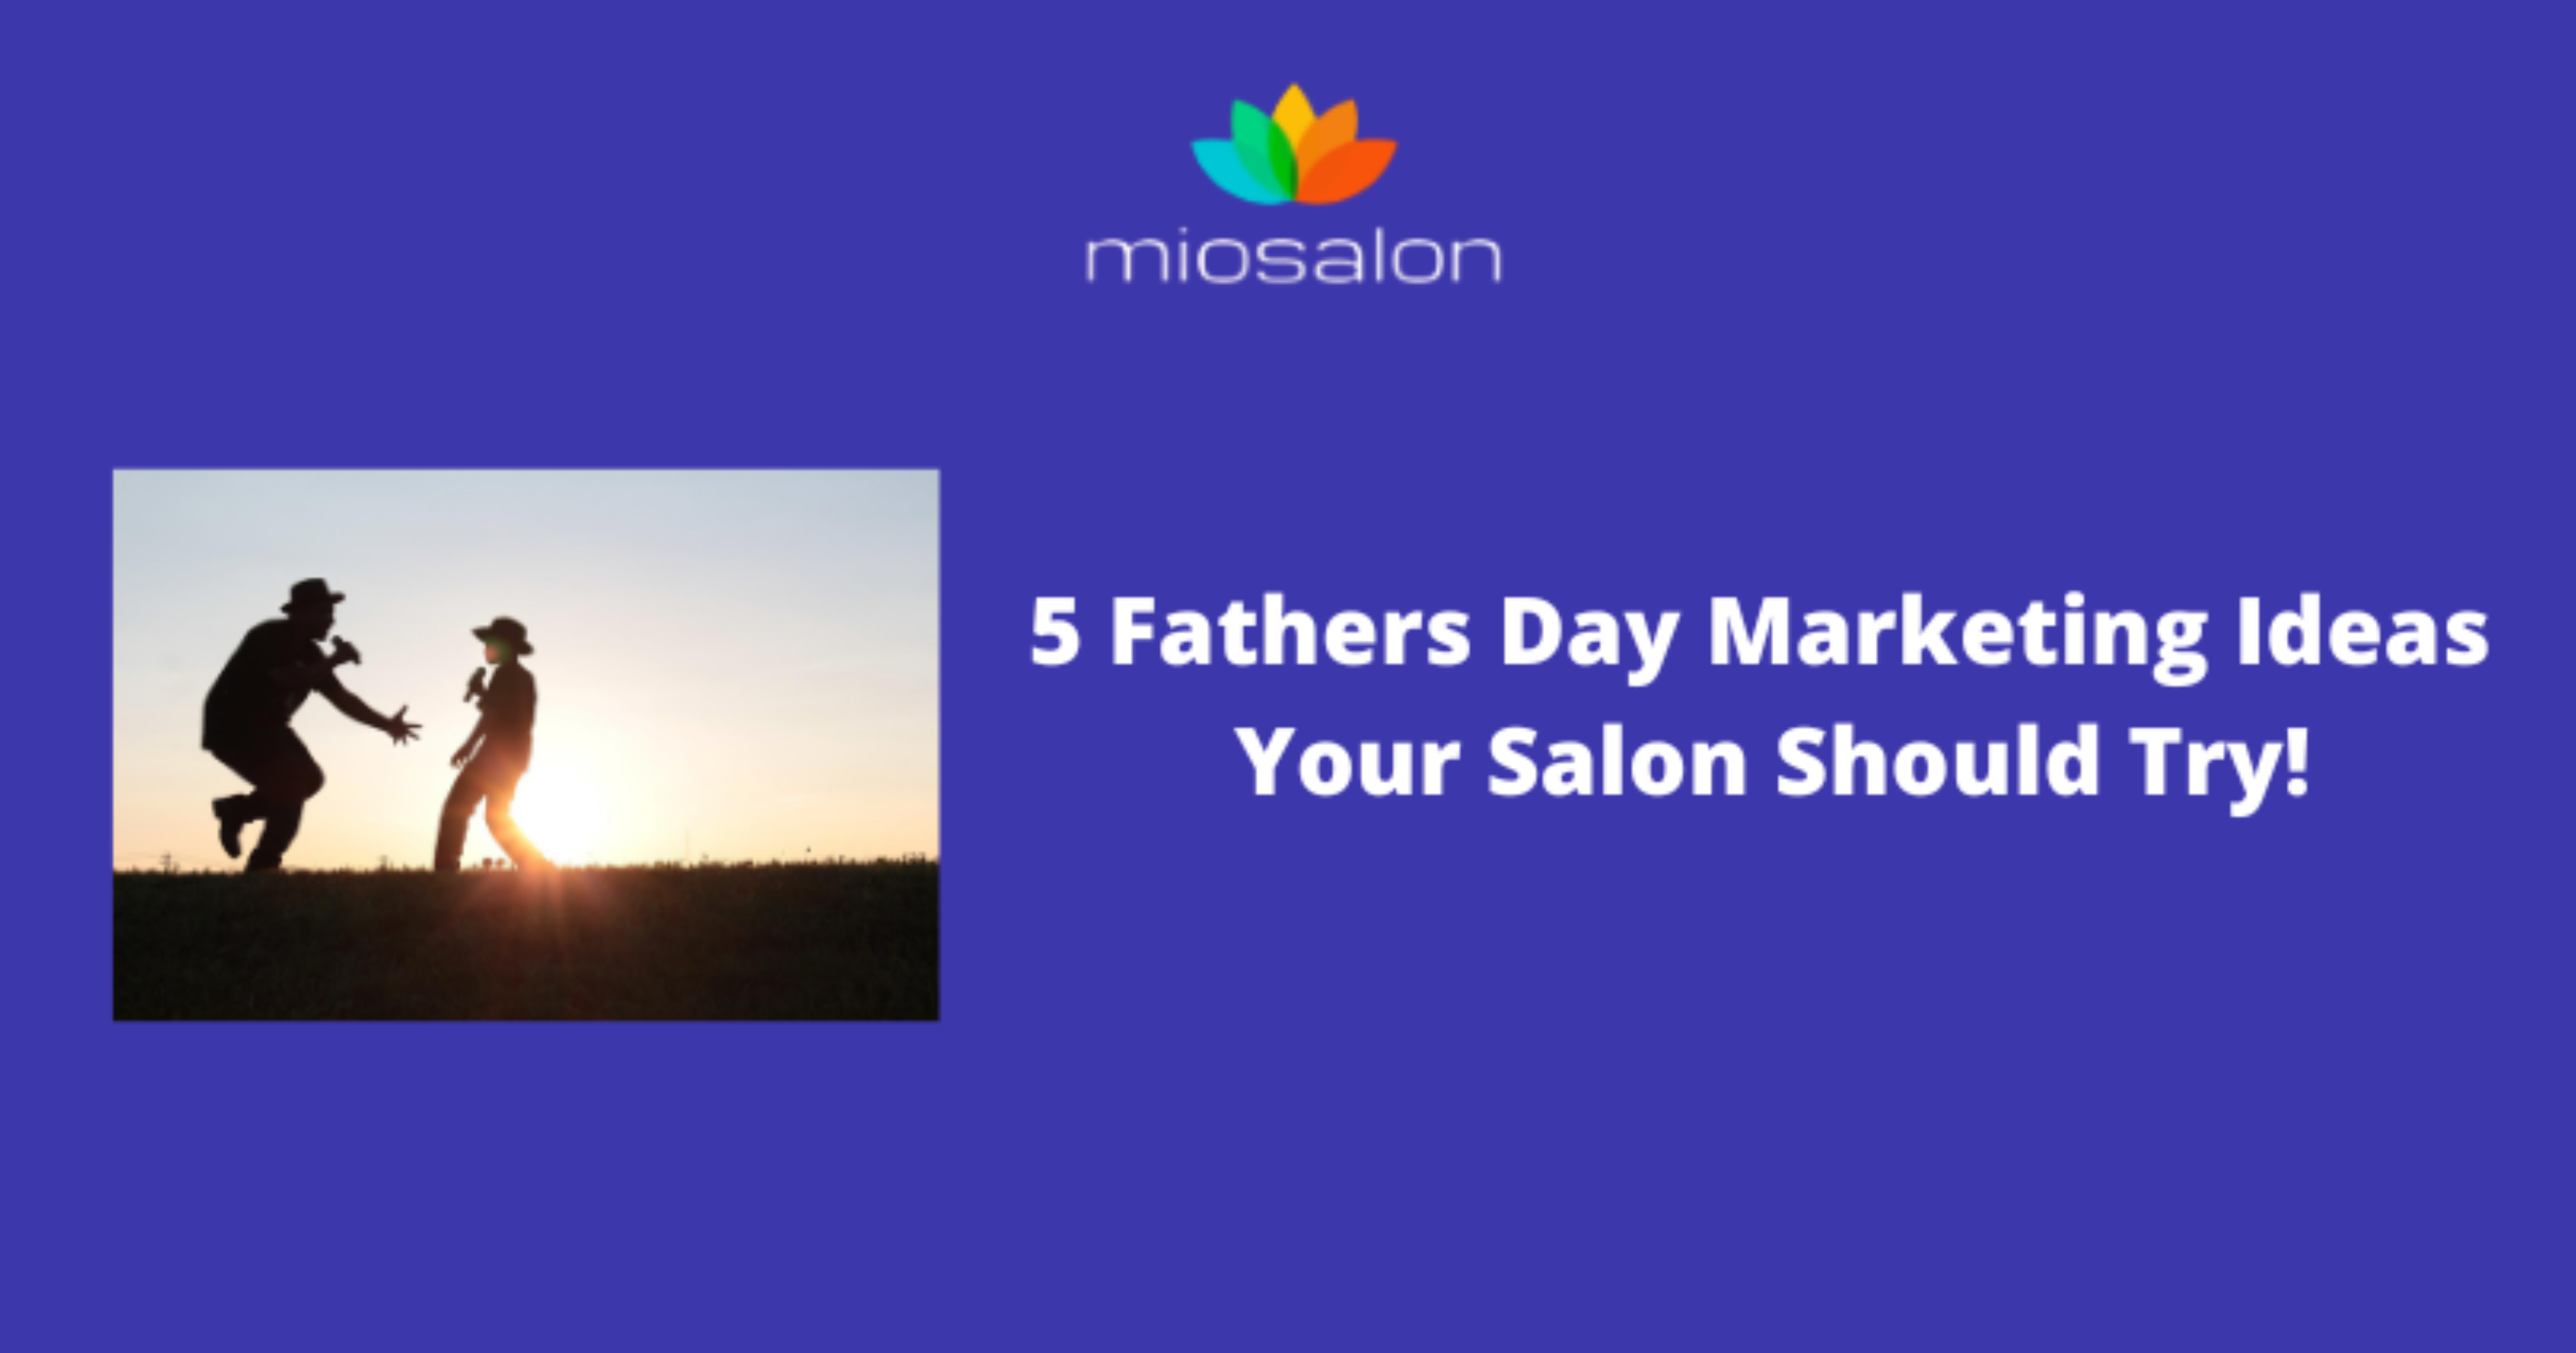 5 Fathers Day Marketing Ideas Your Salon Should Try!